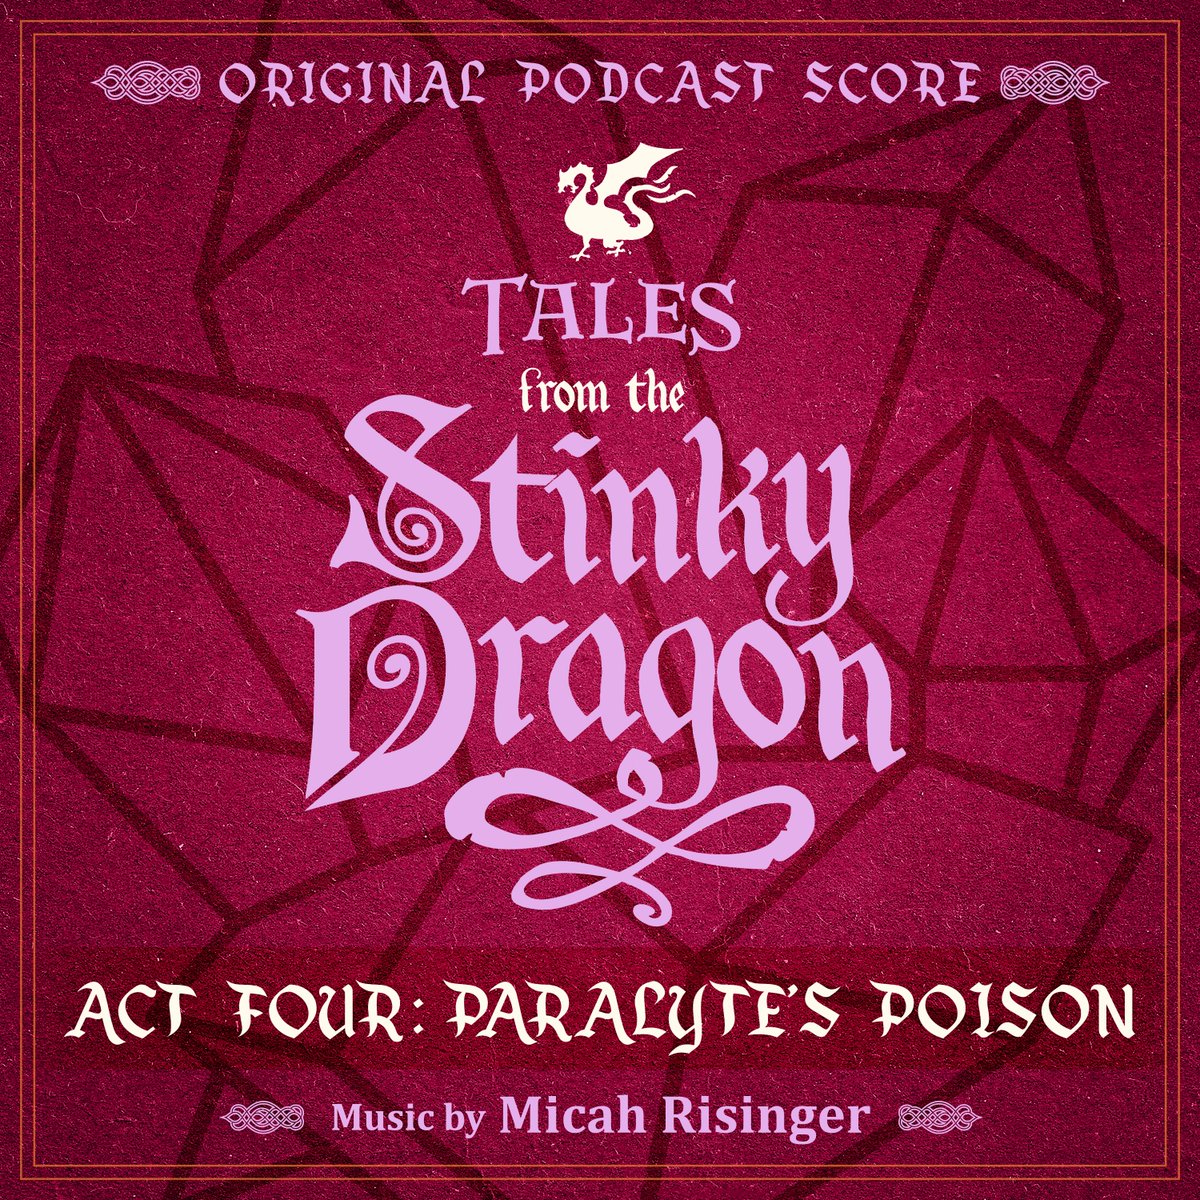 Get your party ready, the fourth #stinkydragonpod album just dropped! Paralyte's Poison available on all your favorite music streaming platforms! 

🎼 by @micahrisinger 

#dnd5e #dungeonsanddragons #dndpodcast #stinkydragonpod #dndmusic